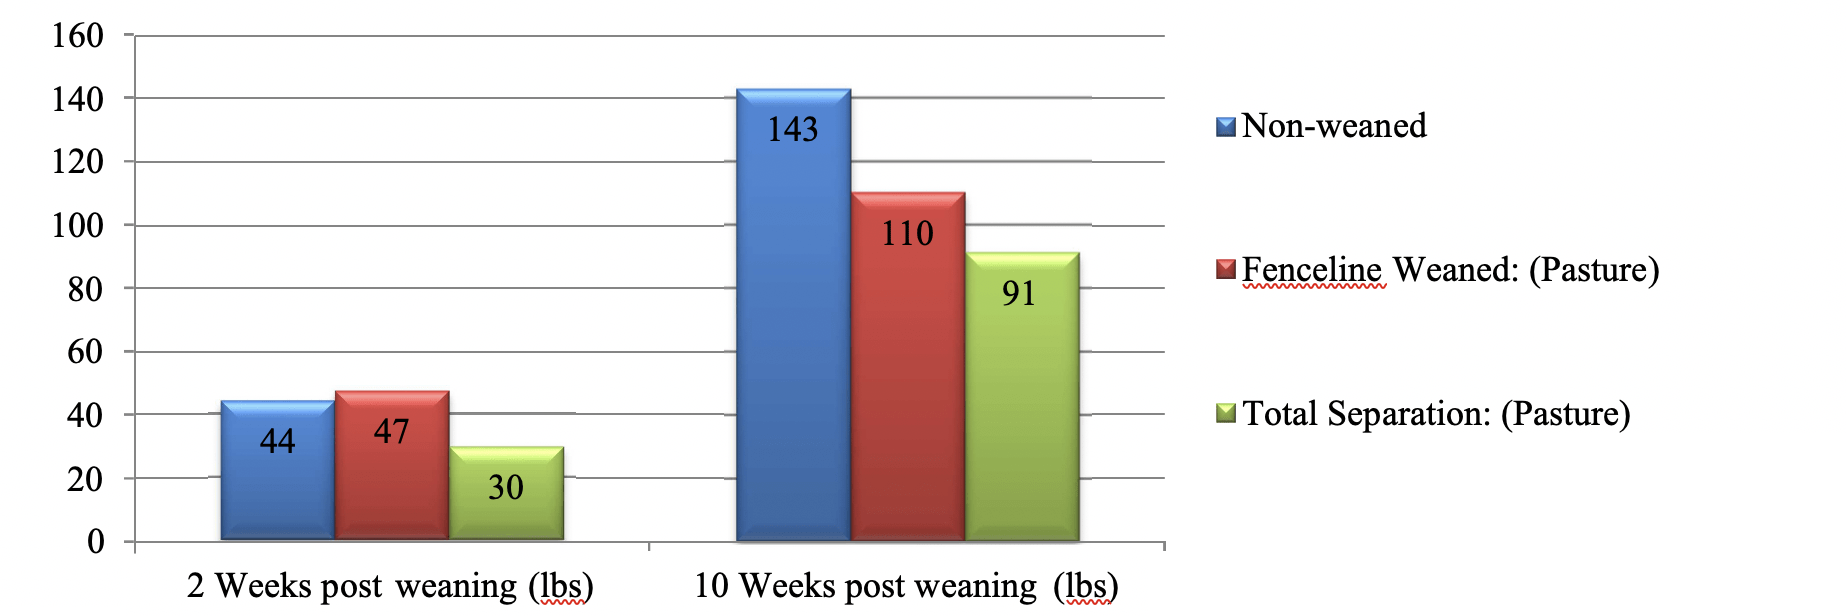 Graph showing weight gain by calves according to how they were weaned. Two weeks after weaning, non-weaned calves gained 44 pounds, fenceline-weaned calves gained 47 pounds and total-separation calves gained 30. Ten weeks after weaning, non-weaned gained